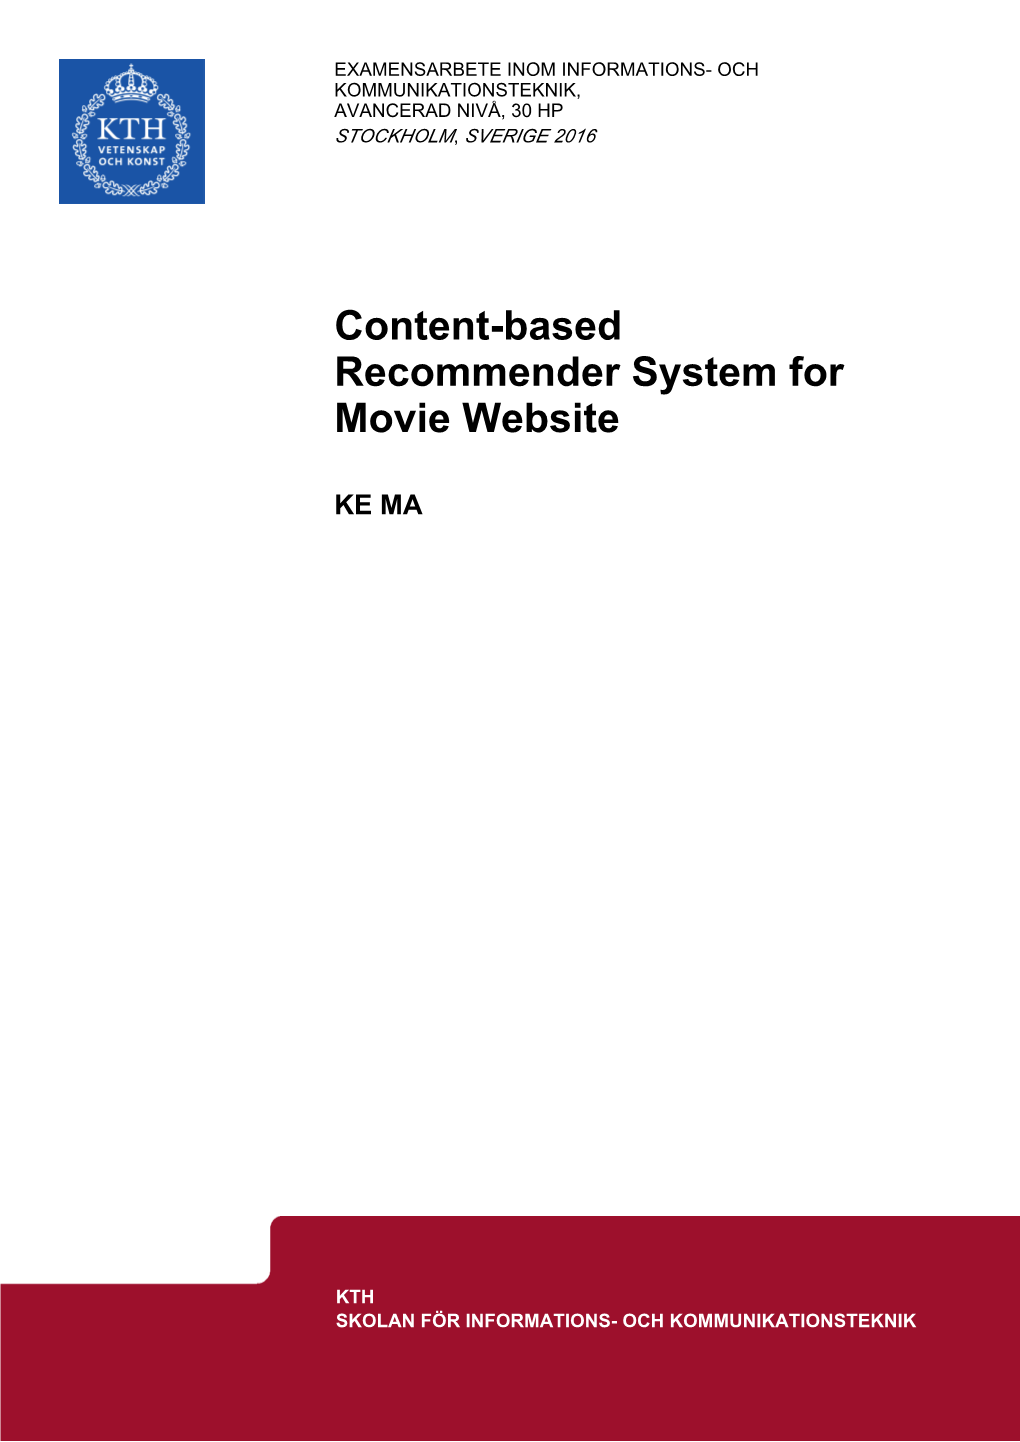 Content-Based Recommender System for Movie Website